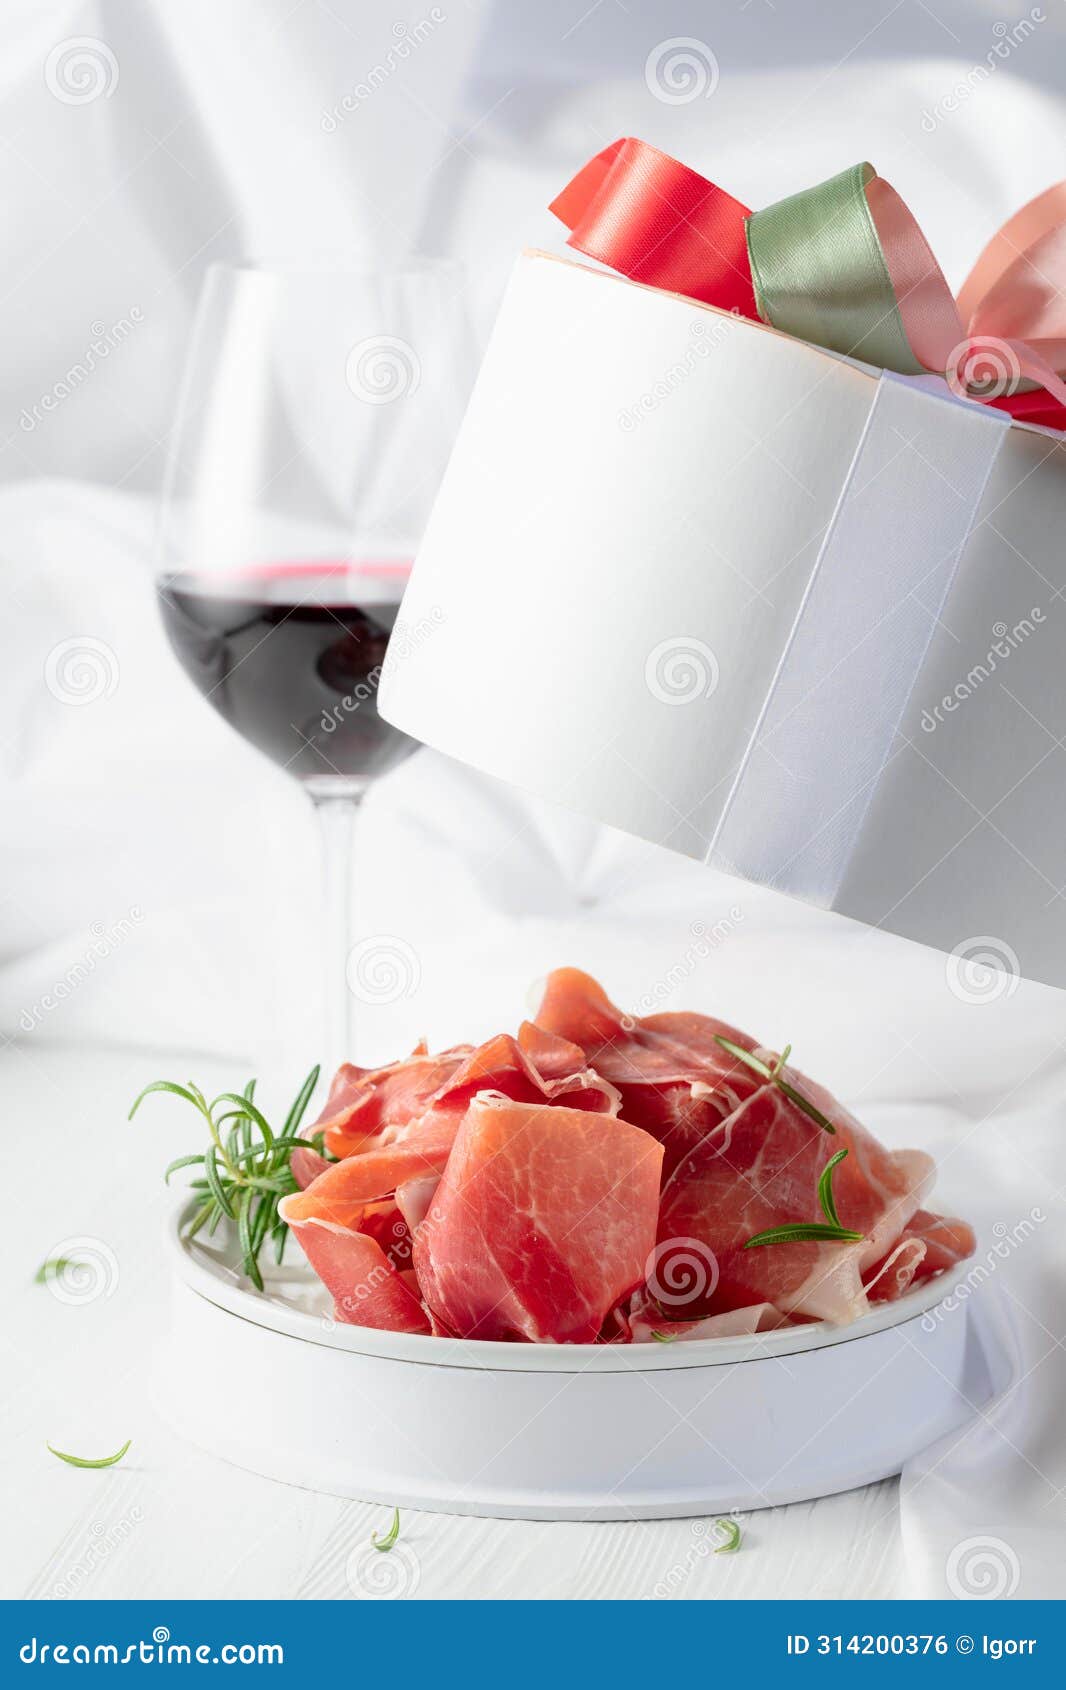 Prosciutto with Rosemary in Gift Box and Glass of Red Wine on a White ...